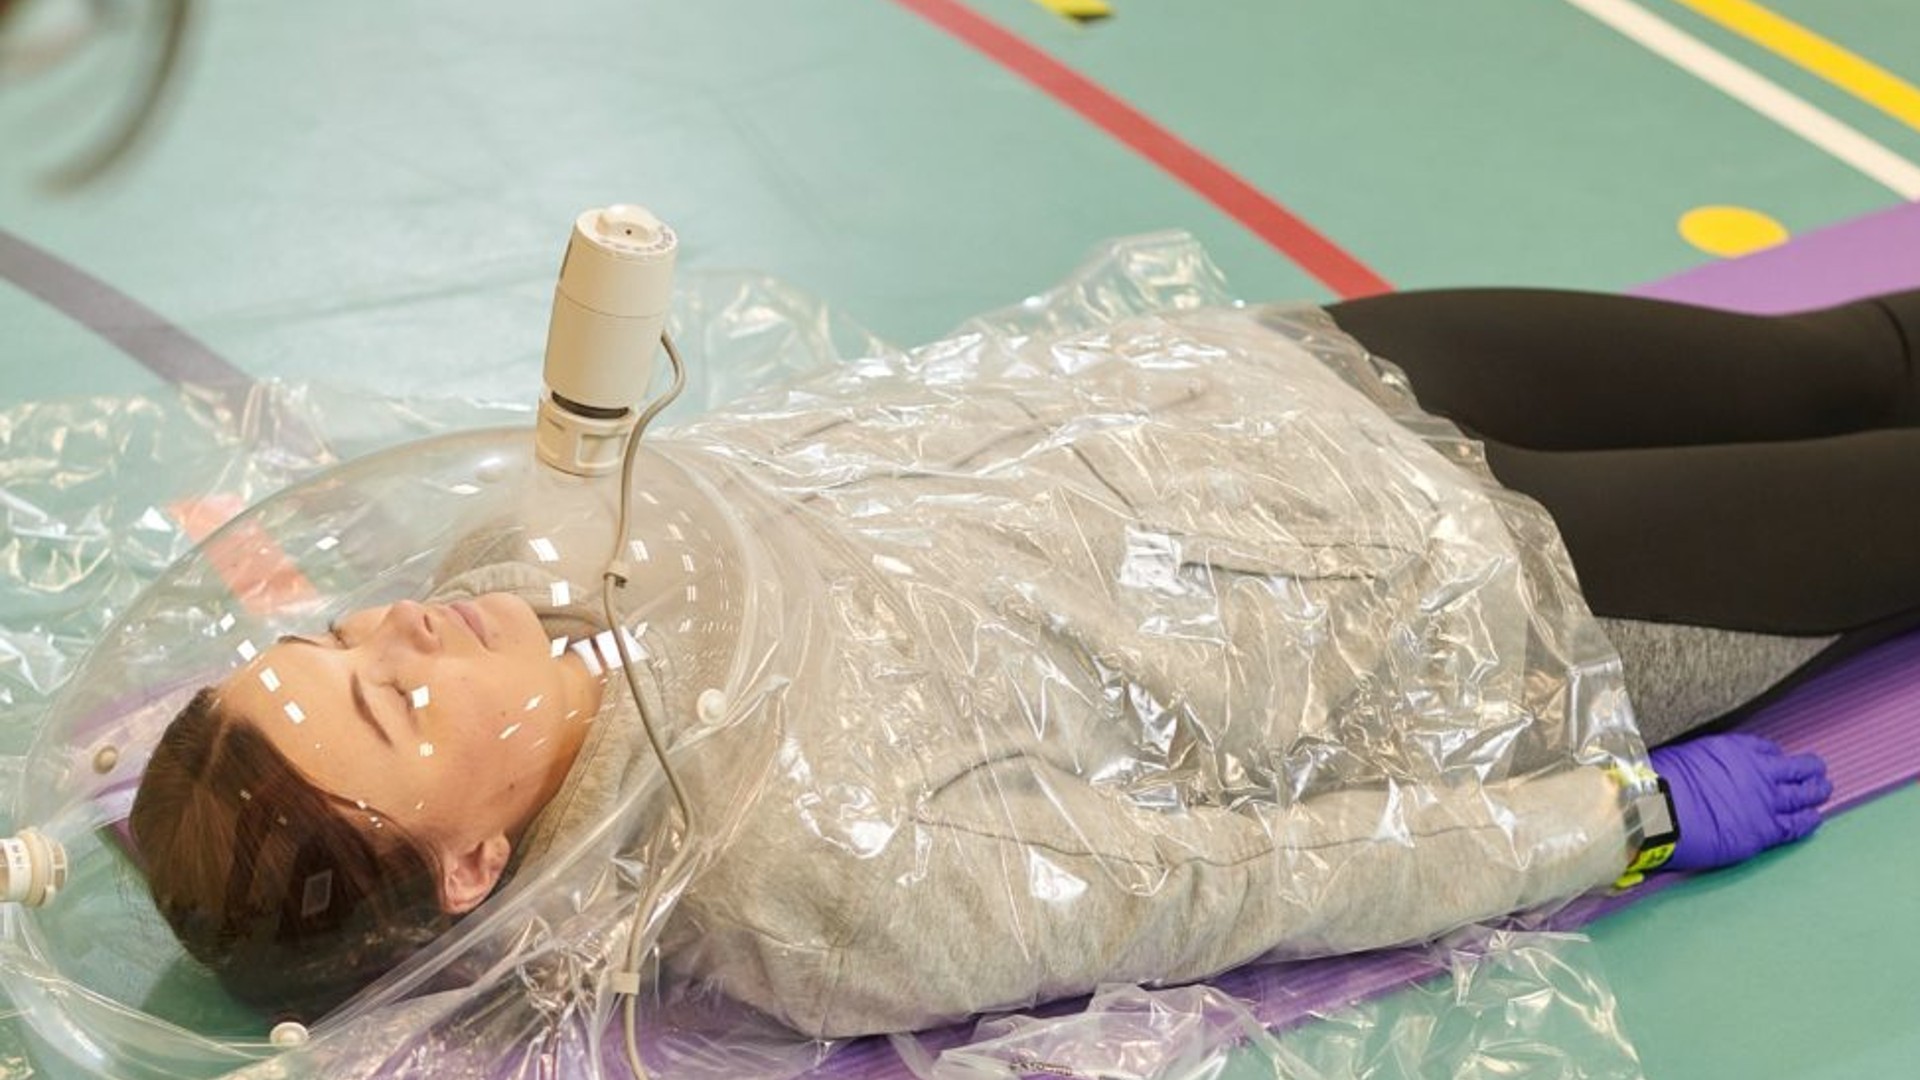 An image of a person lay on the floor with a large see-through mask over their head.